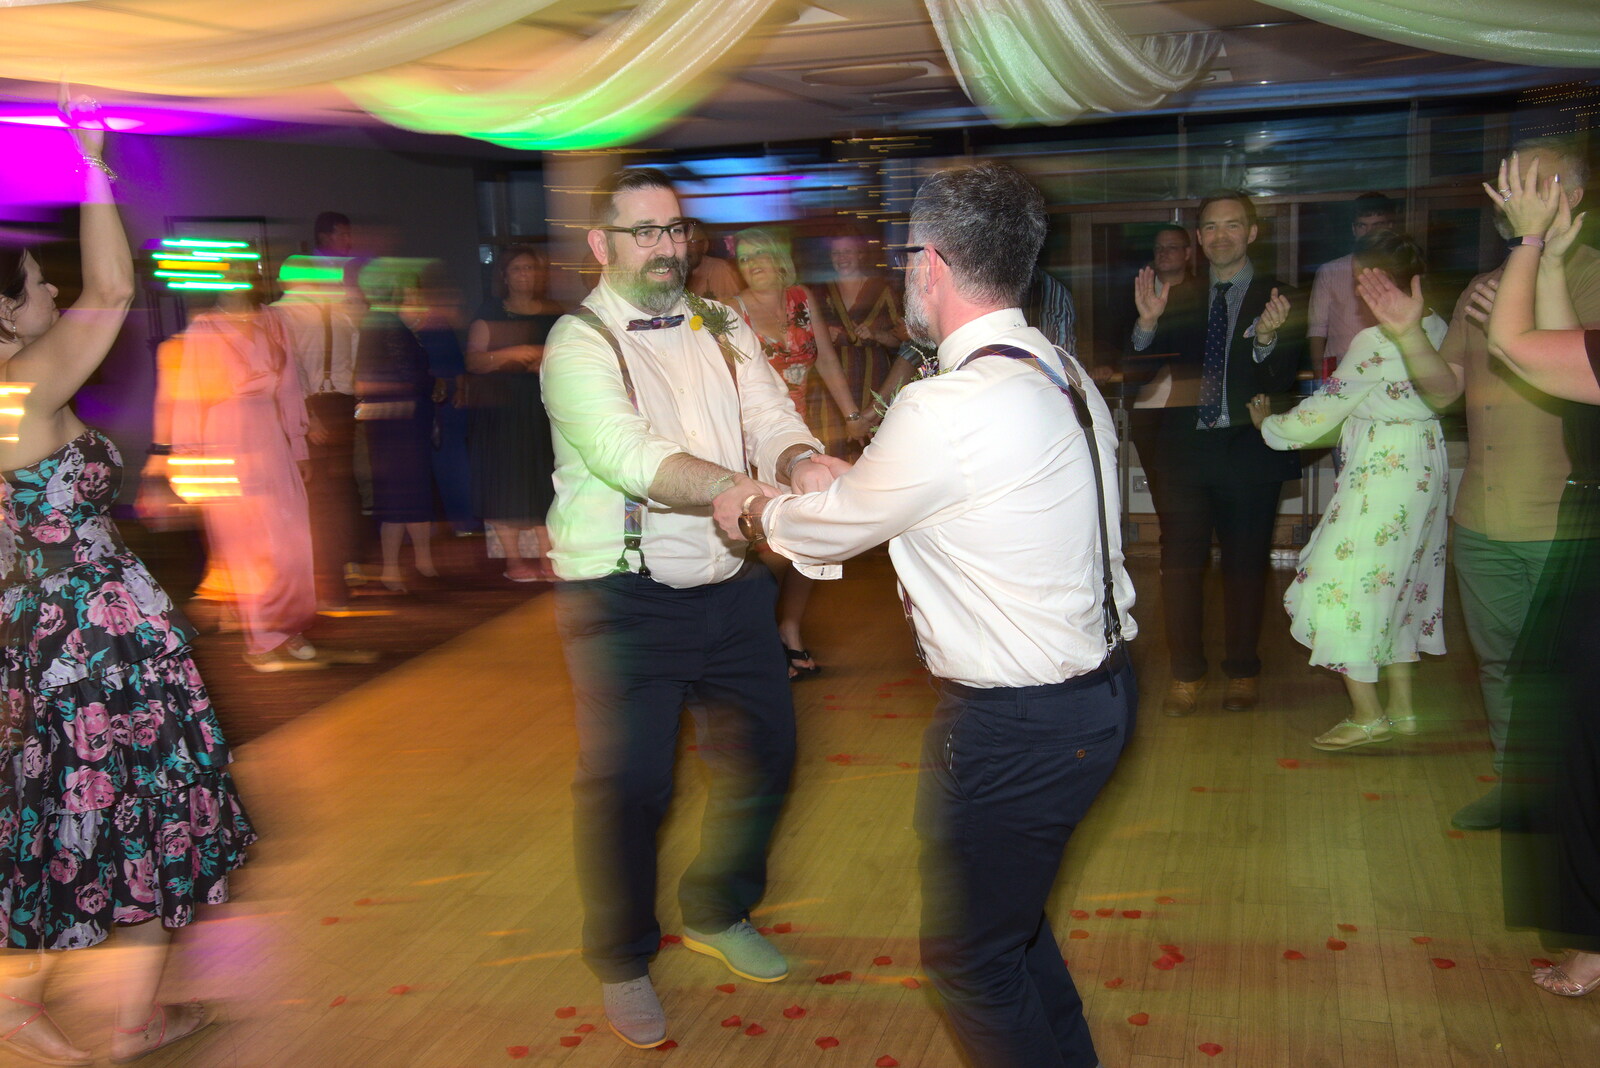 More first dancing from Petay's Wedding Reception, Fanhams Hall, Ware, Hertfordshire - 20th August 2021